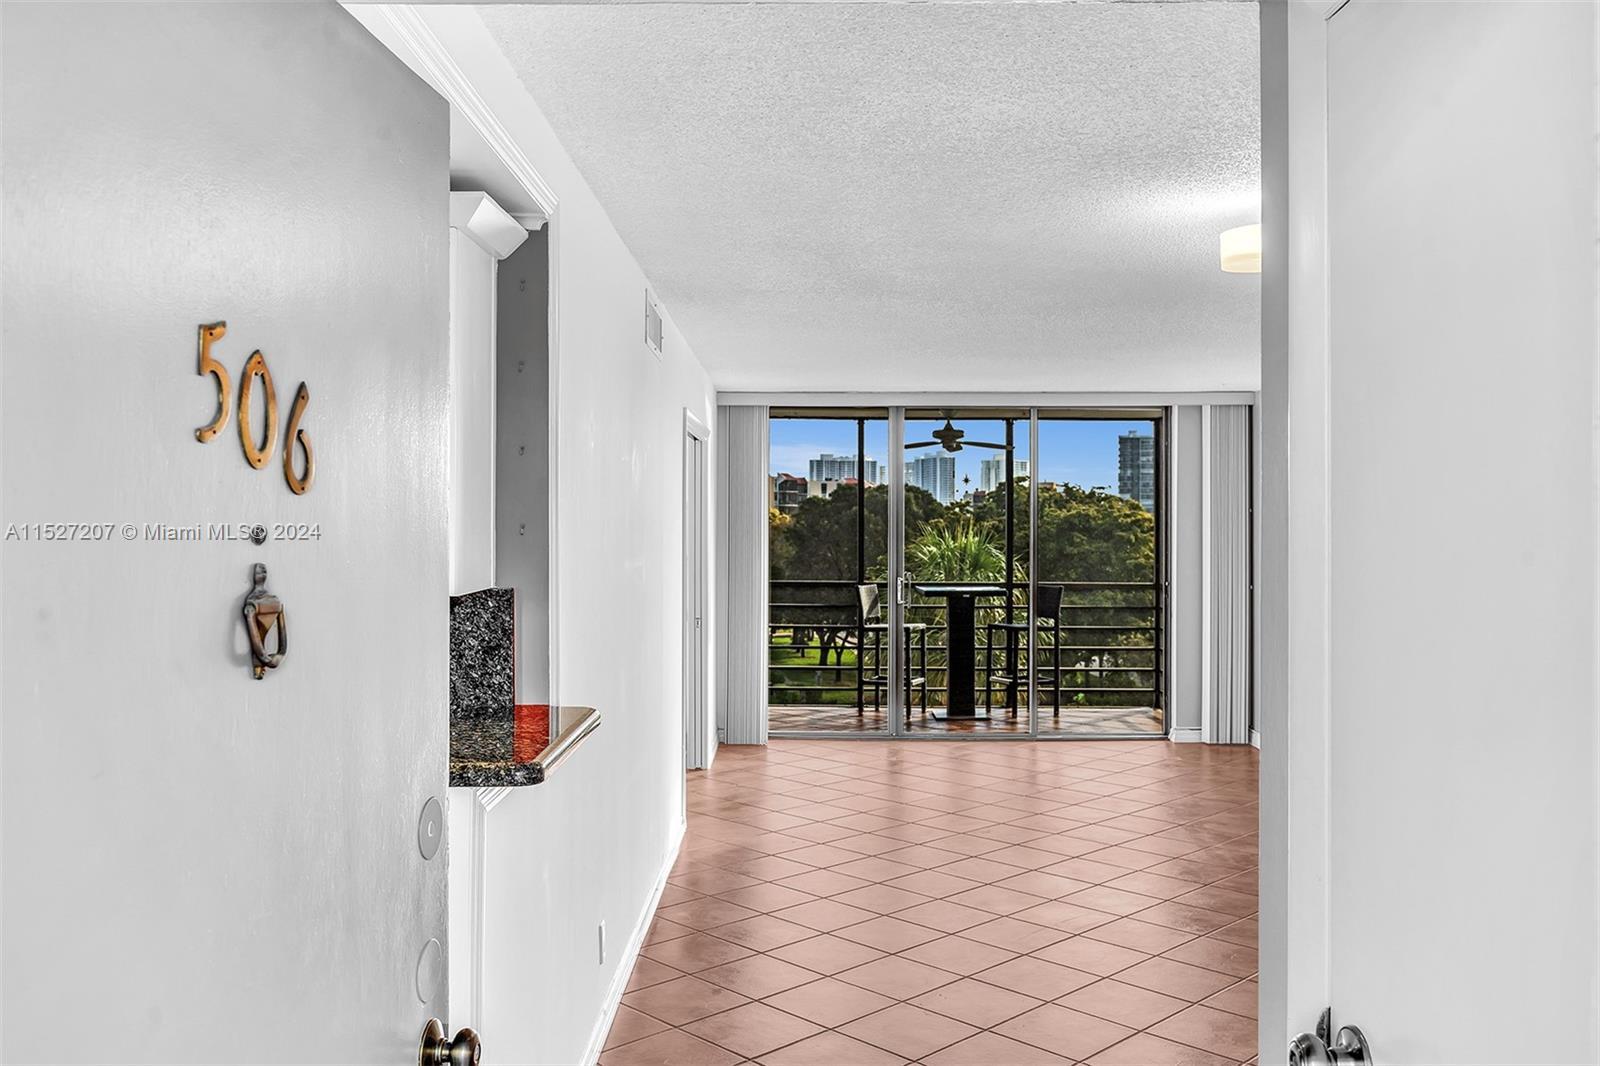 An amazing opportunity! A pristine 2 bedroom/2 bath condo located on Country Club Drive. This beauti